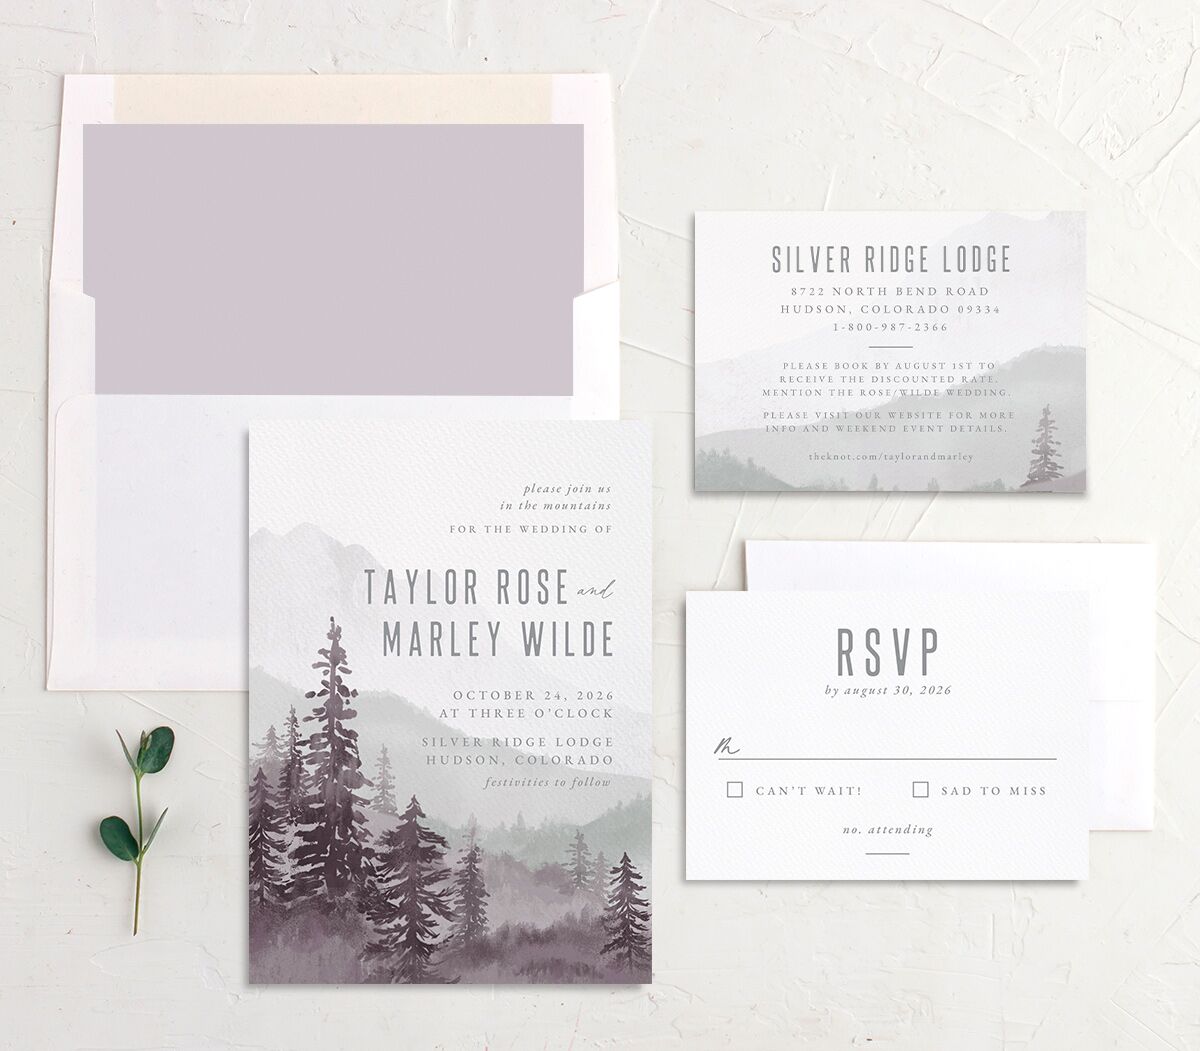 Painted Mountains Wedding Invitations suite in purple